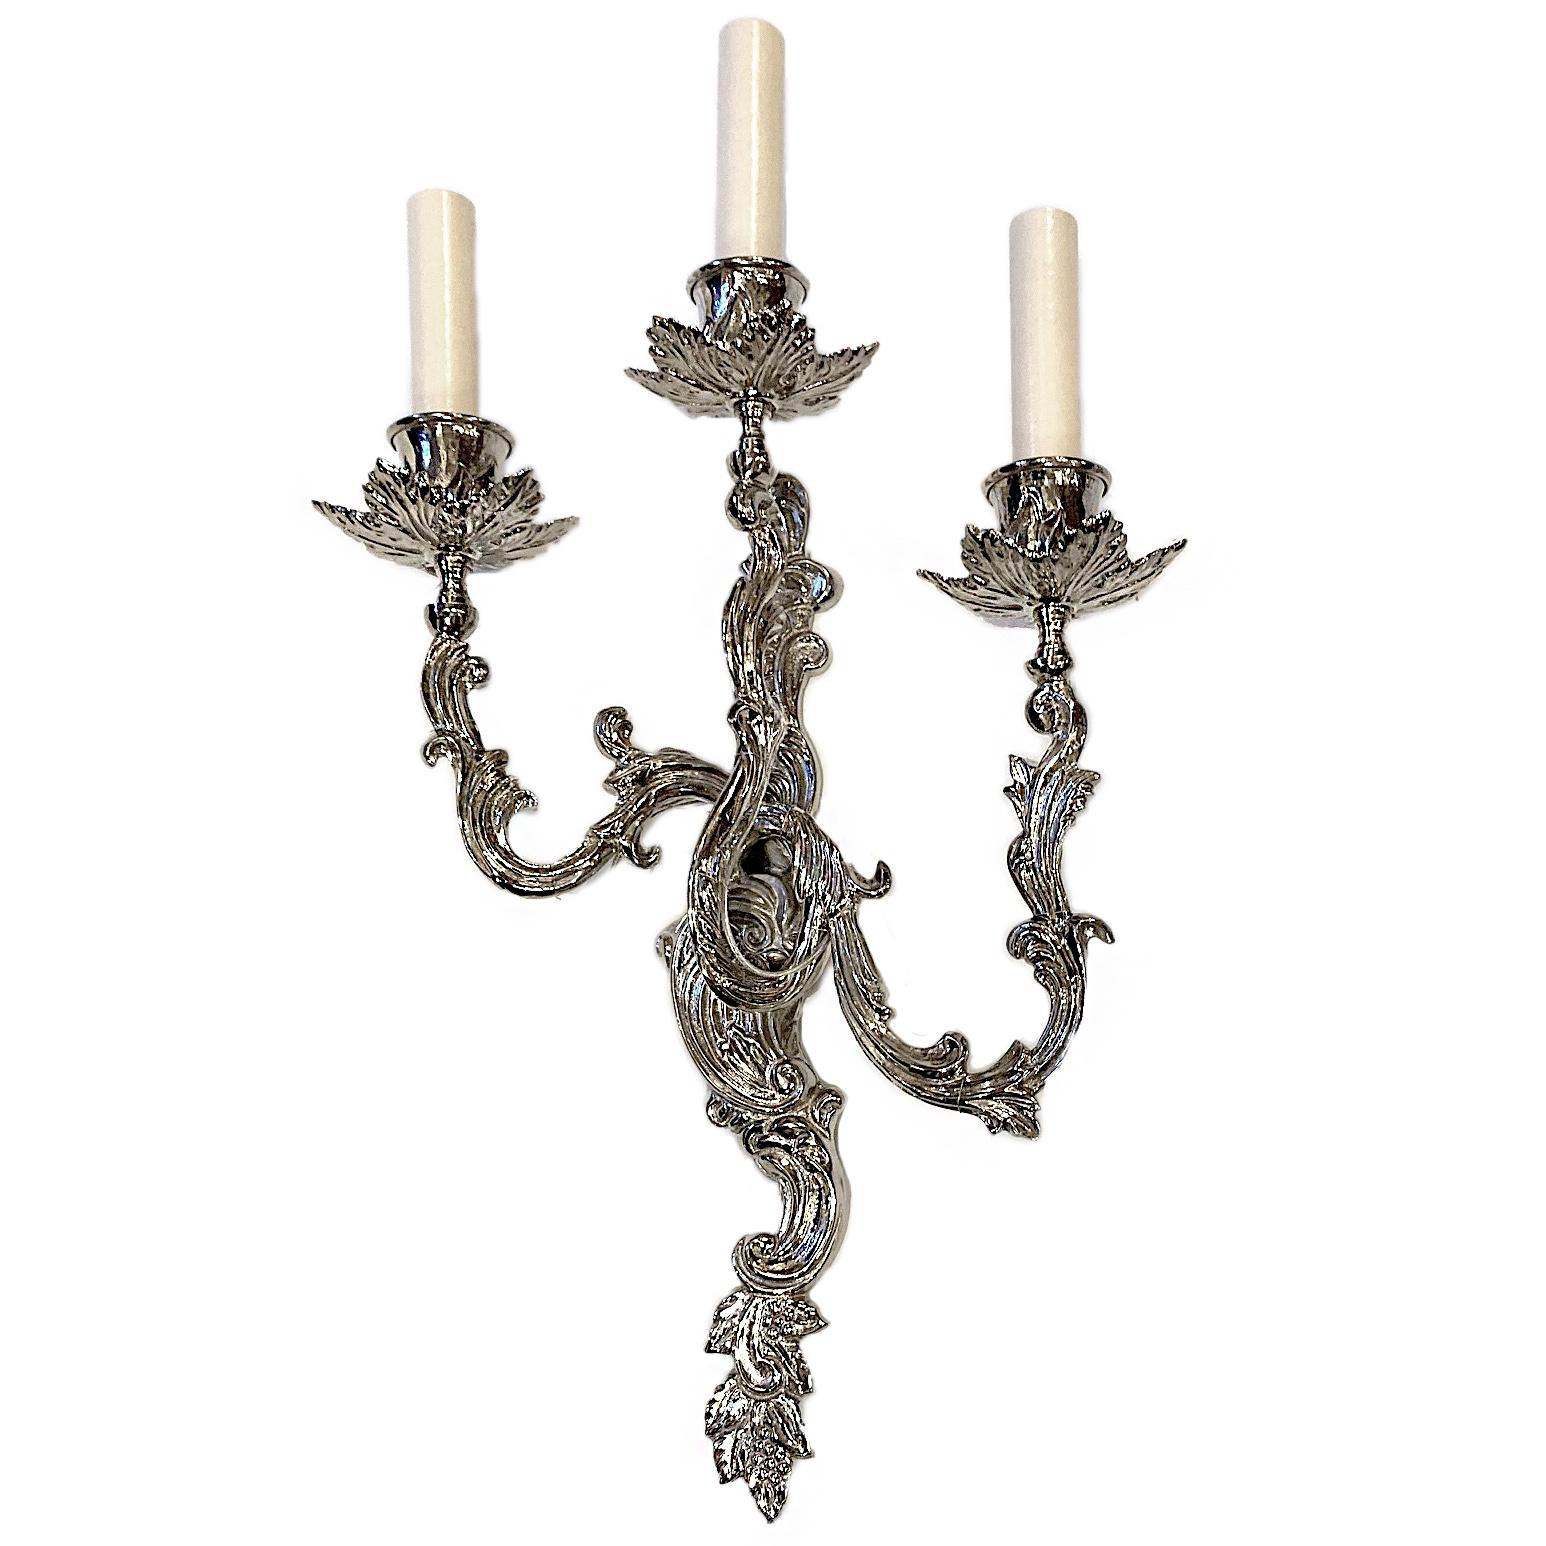 A set of four French circa 1950s Louis XV style three-light sconces with silver plated finish.

Measurements:
Height 20